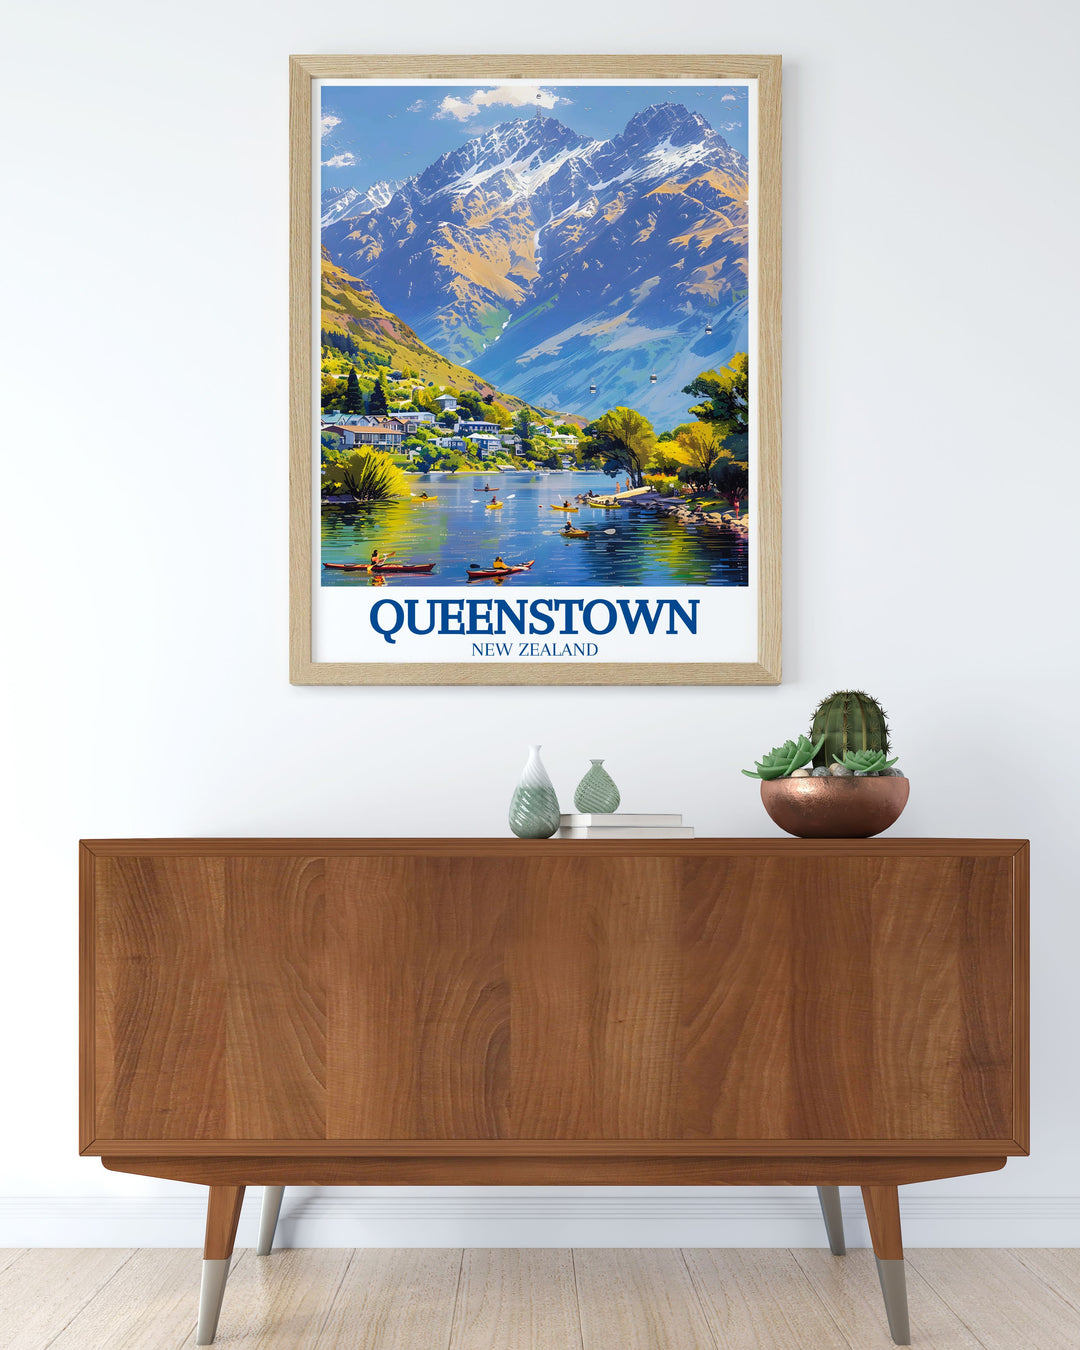 Fine line print of Queenstown showcasing The Remarkables Lake Wakatipu with a timeless black and white design ideal for matted art frames great for enhancing living room or office decor perfect for gifts and wall art lovers